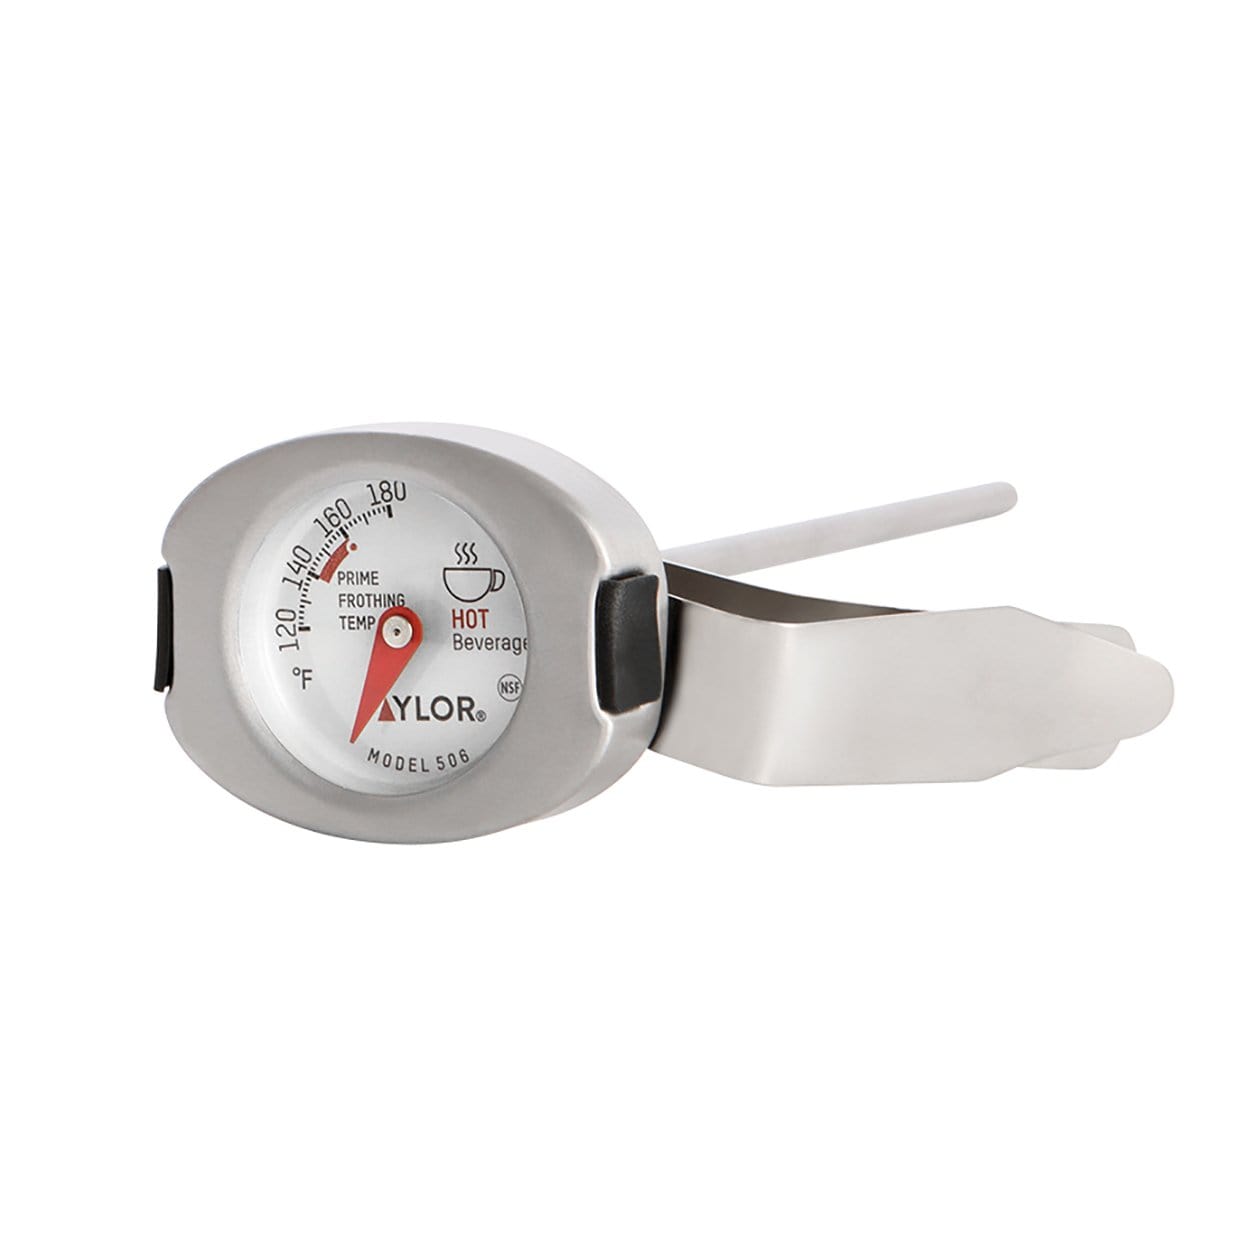 CDN IRTL220 ProAccurate Insta-Read 7 Hot Beverage and Frothing Thermometer  - 0 to 220 Degrees Fahrenheit